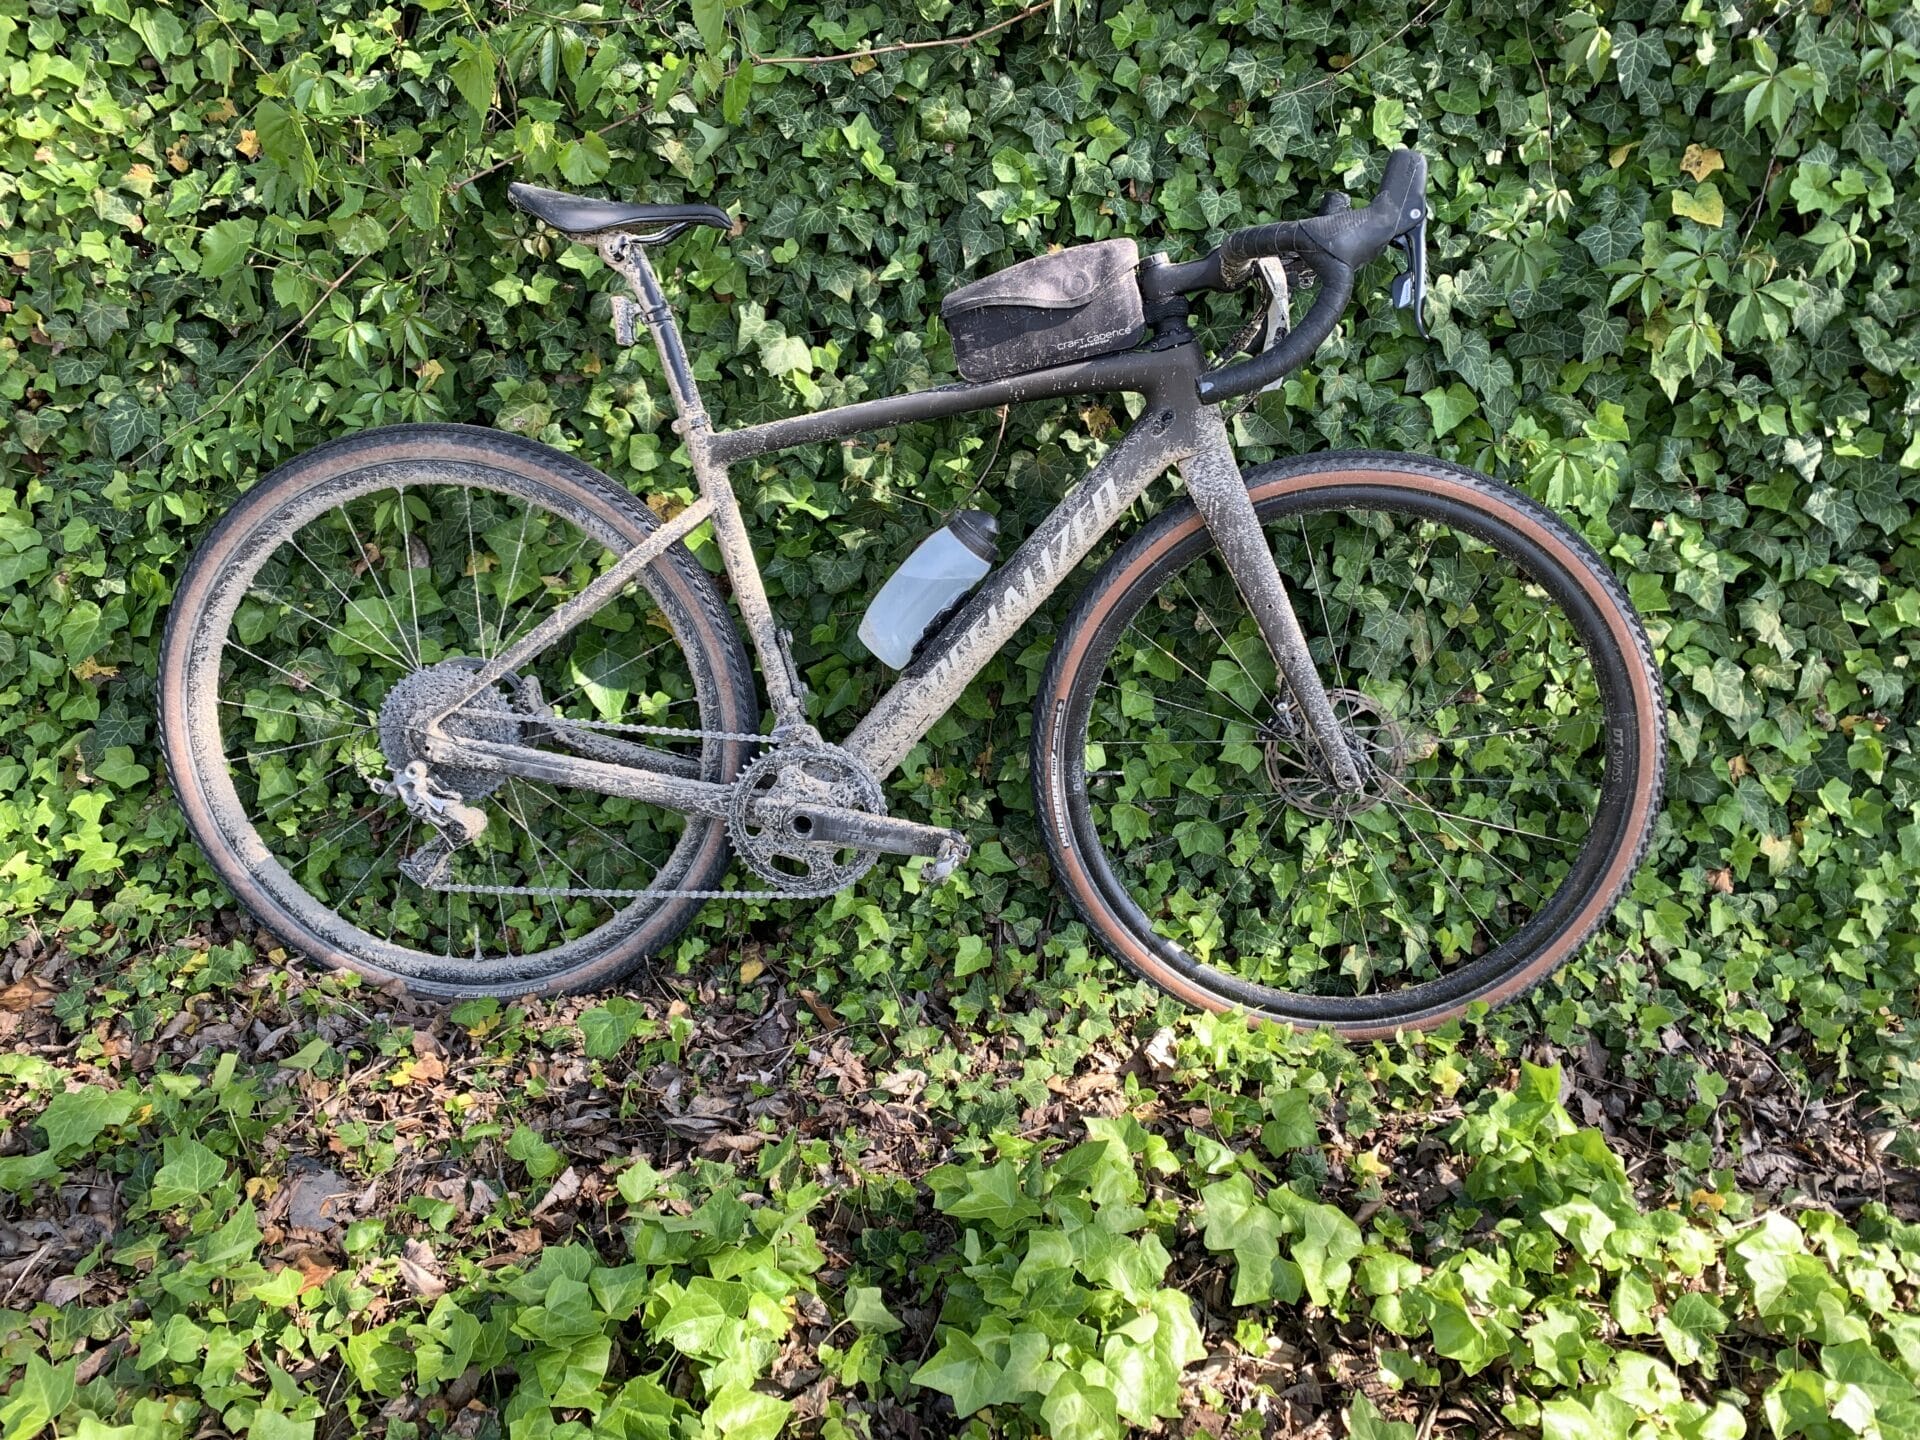 Fidlock bottle on dirty gravel bike with ivy covered wall in background